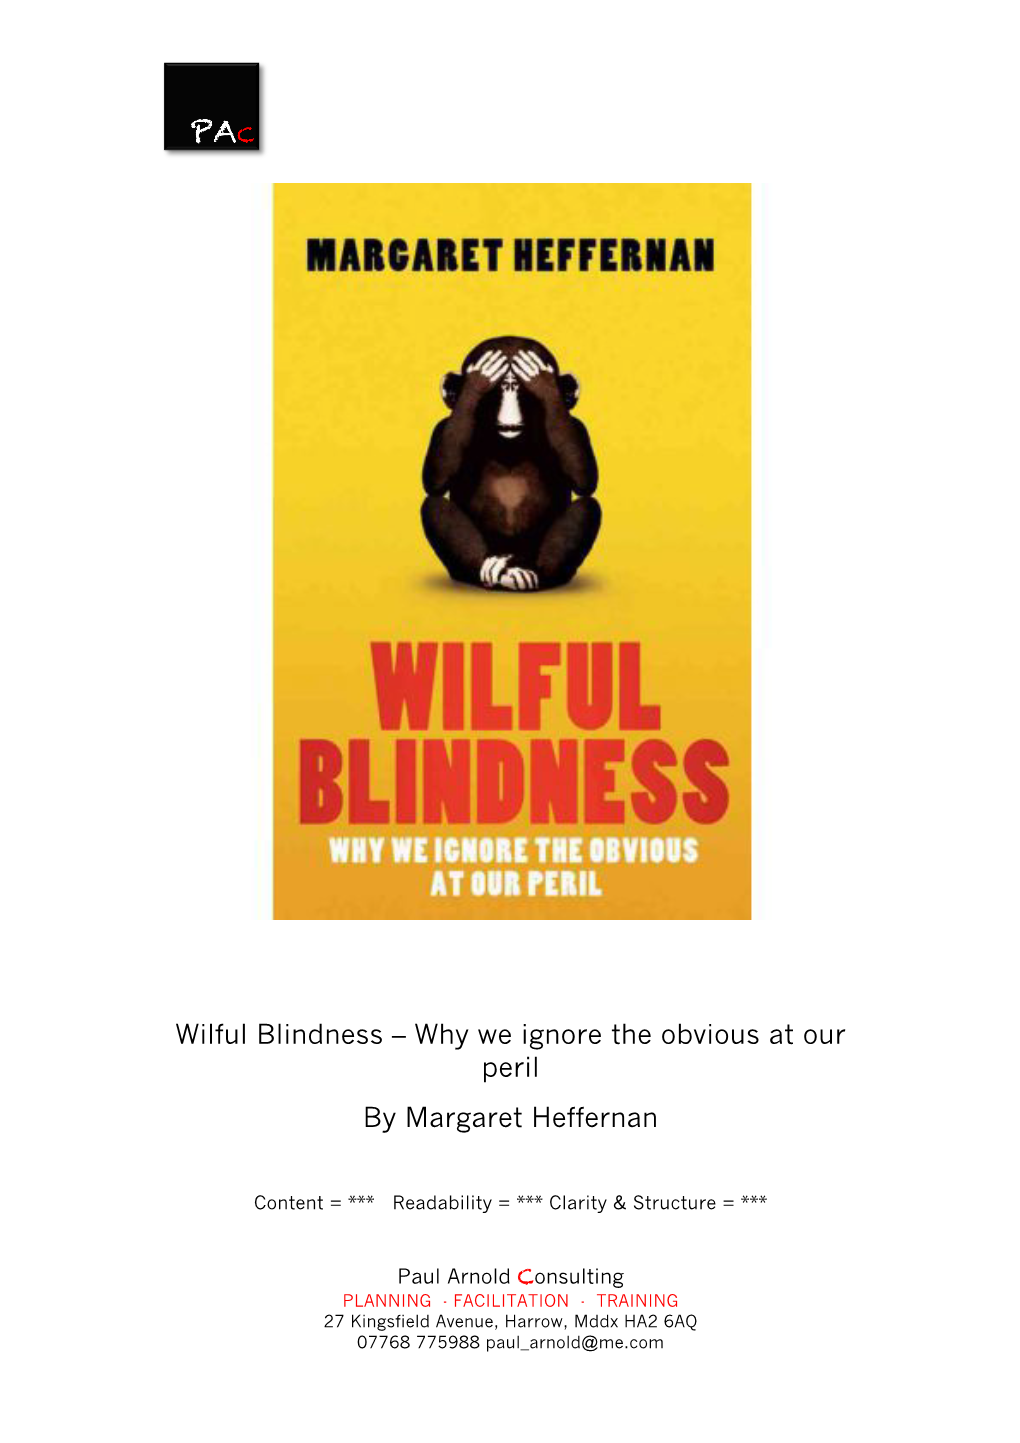 Wilful Blindness – Why We Ignore the Obvious at Our Peril by Margaret Heffernan